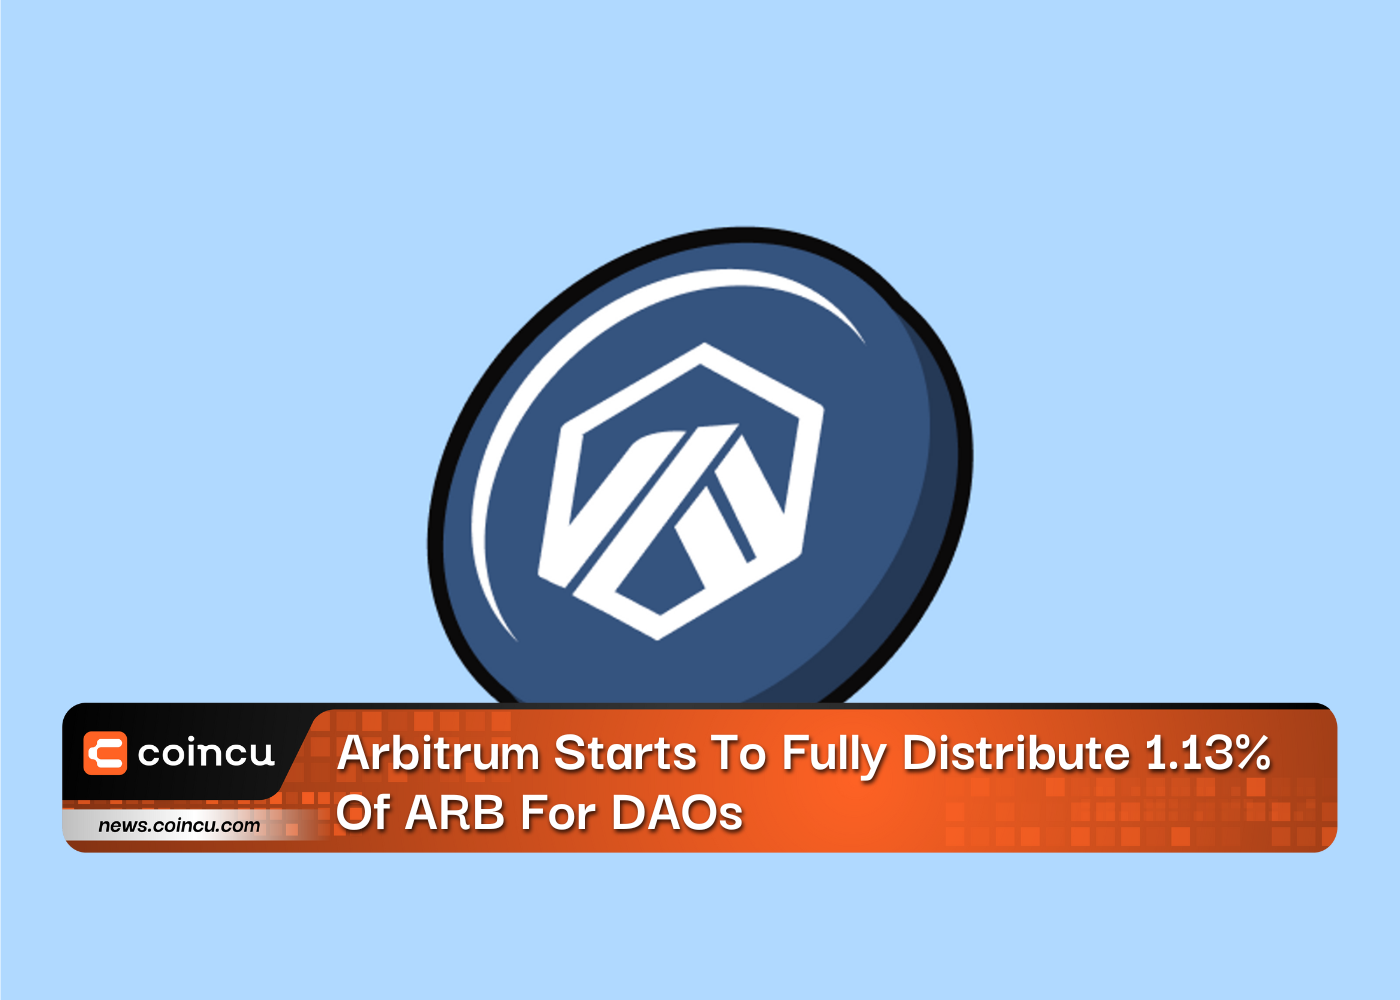 Arbitrum Starts To Fully Distribute 1.13% Of ARB For DAOs